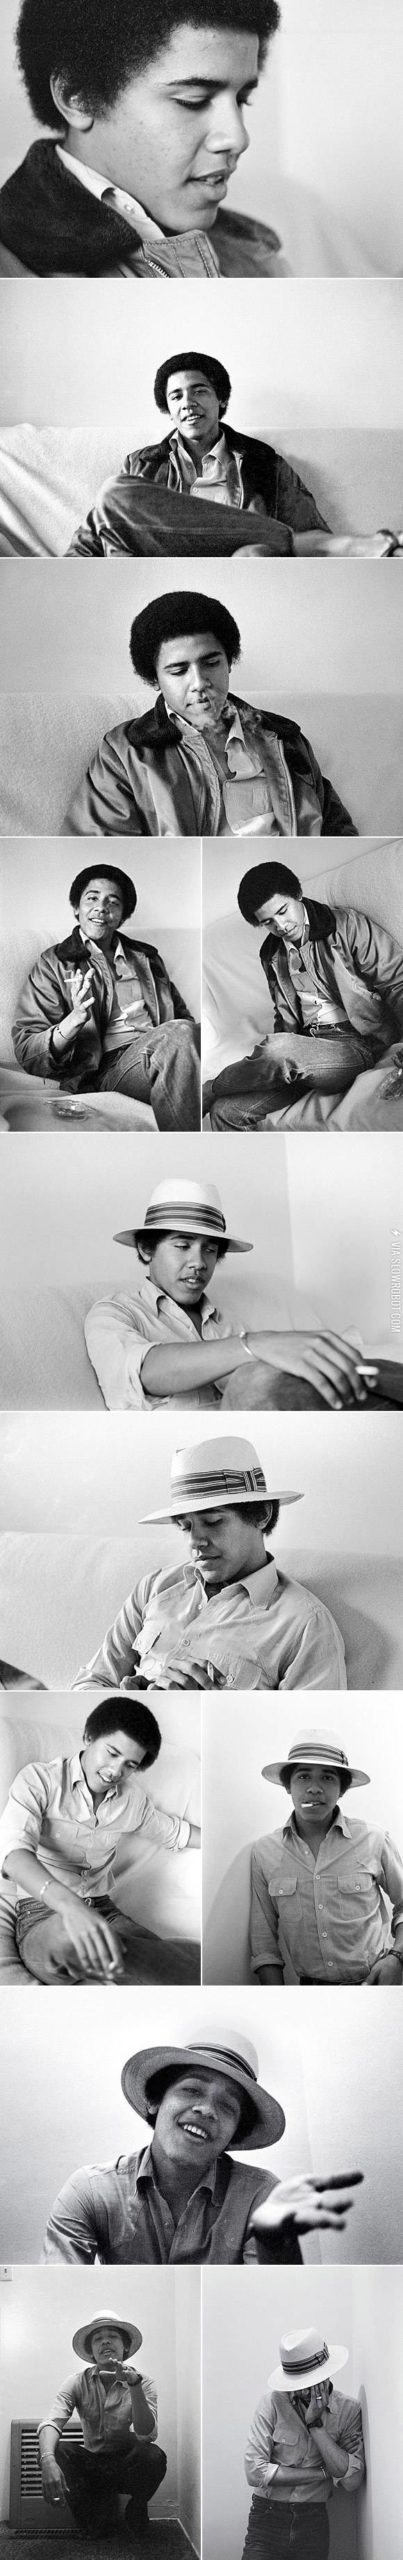 A+young+Obama.